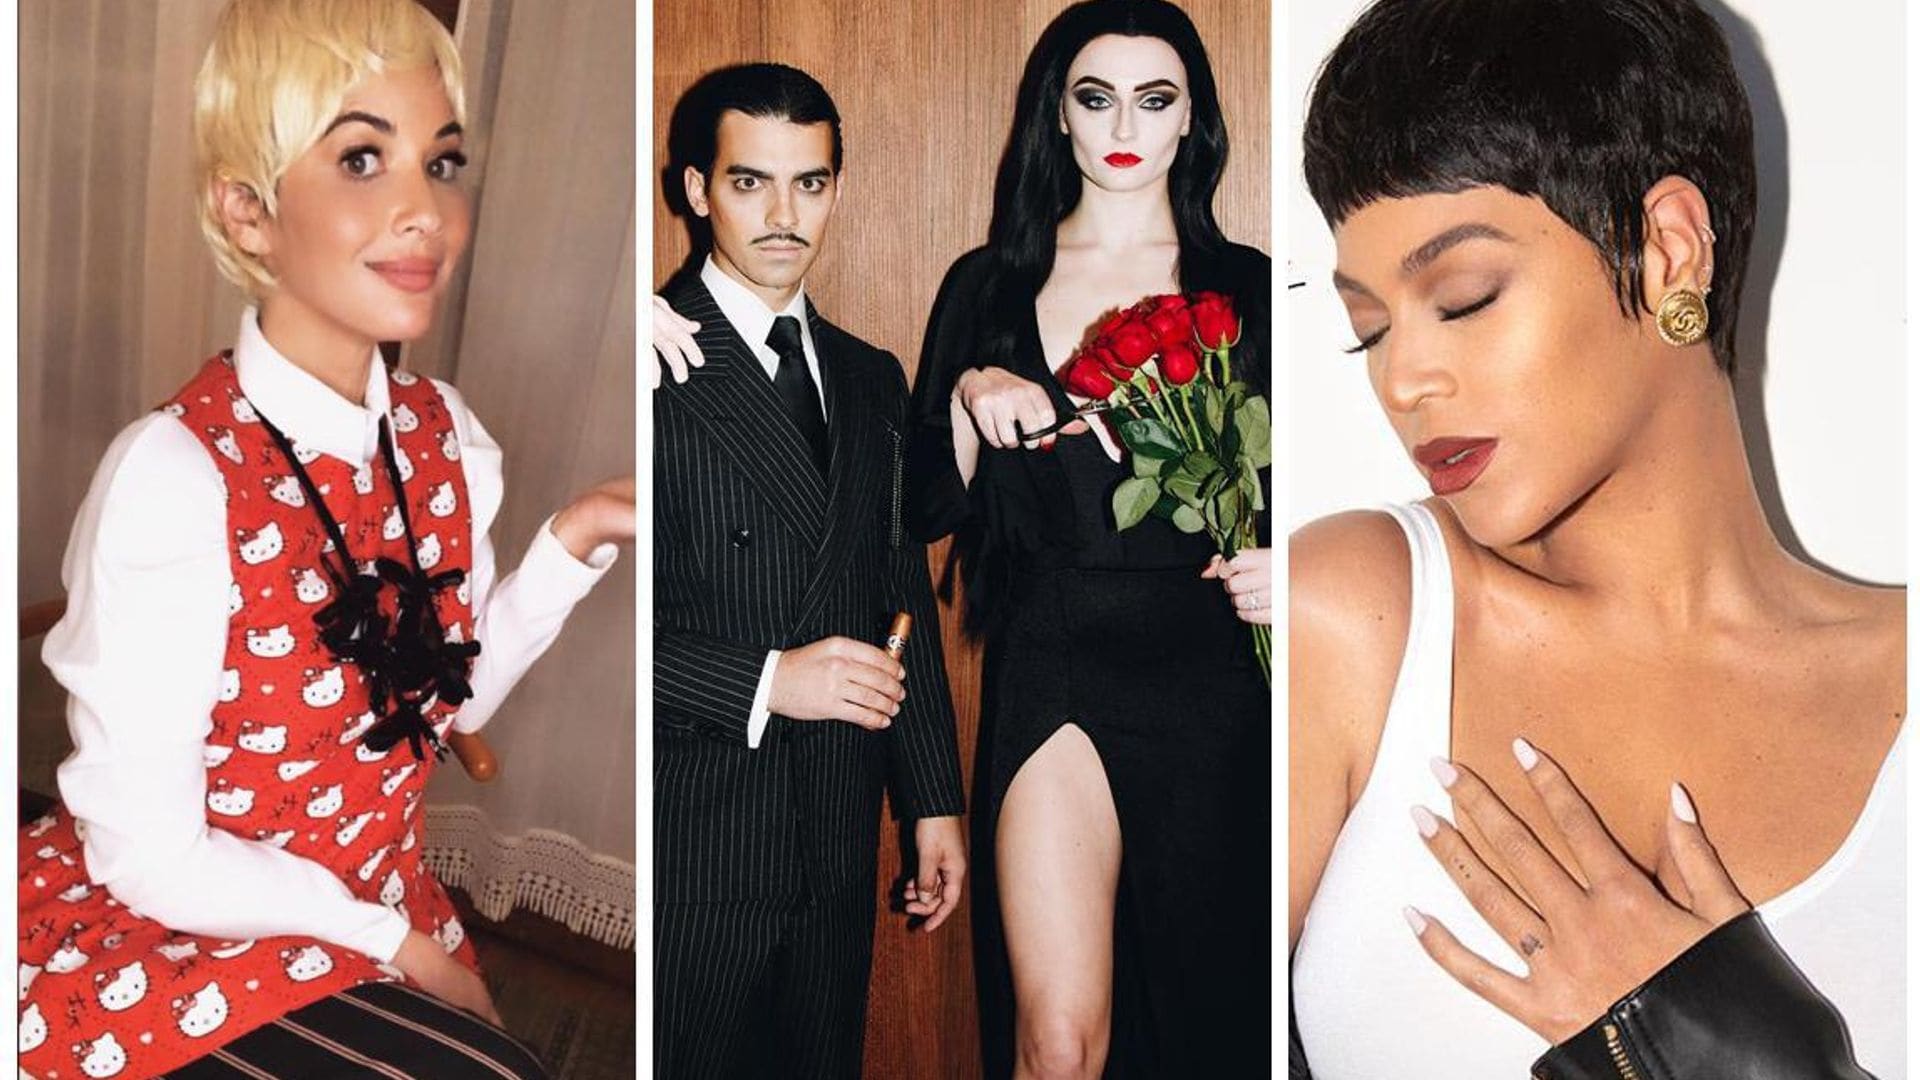 Stars get spooky! Check out the best celebrity Halloween looks